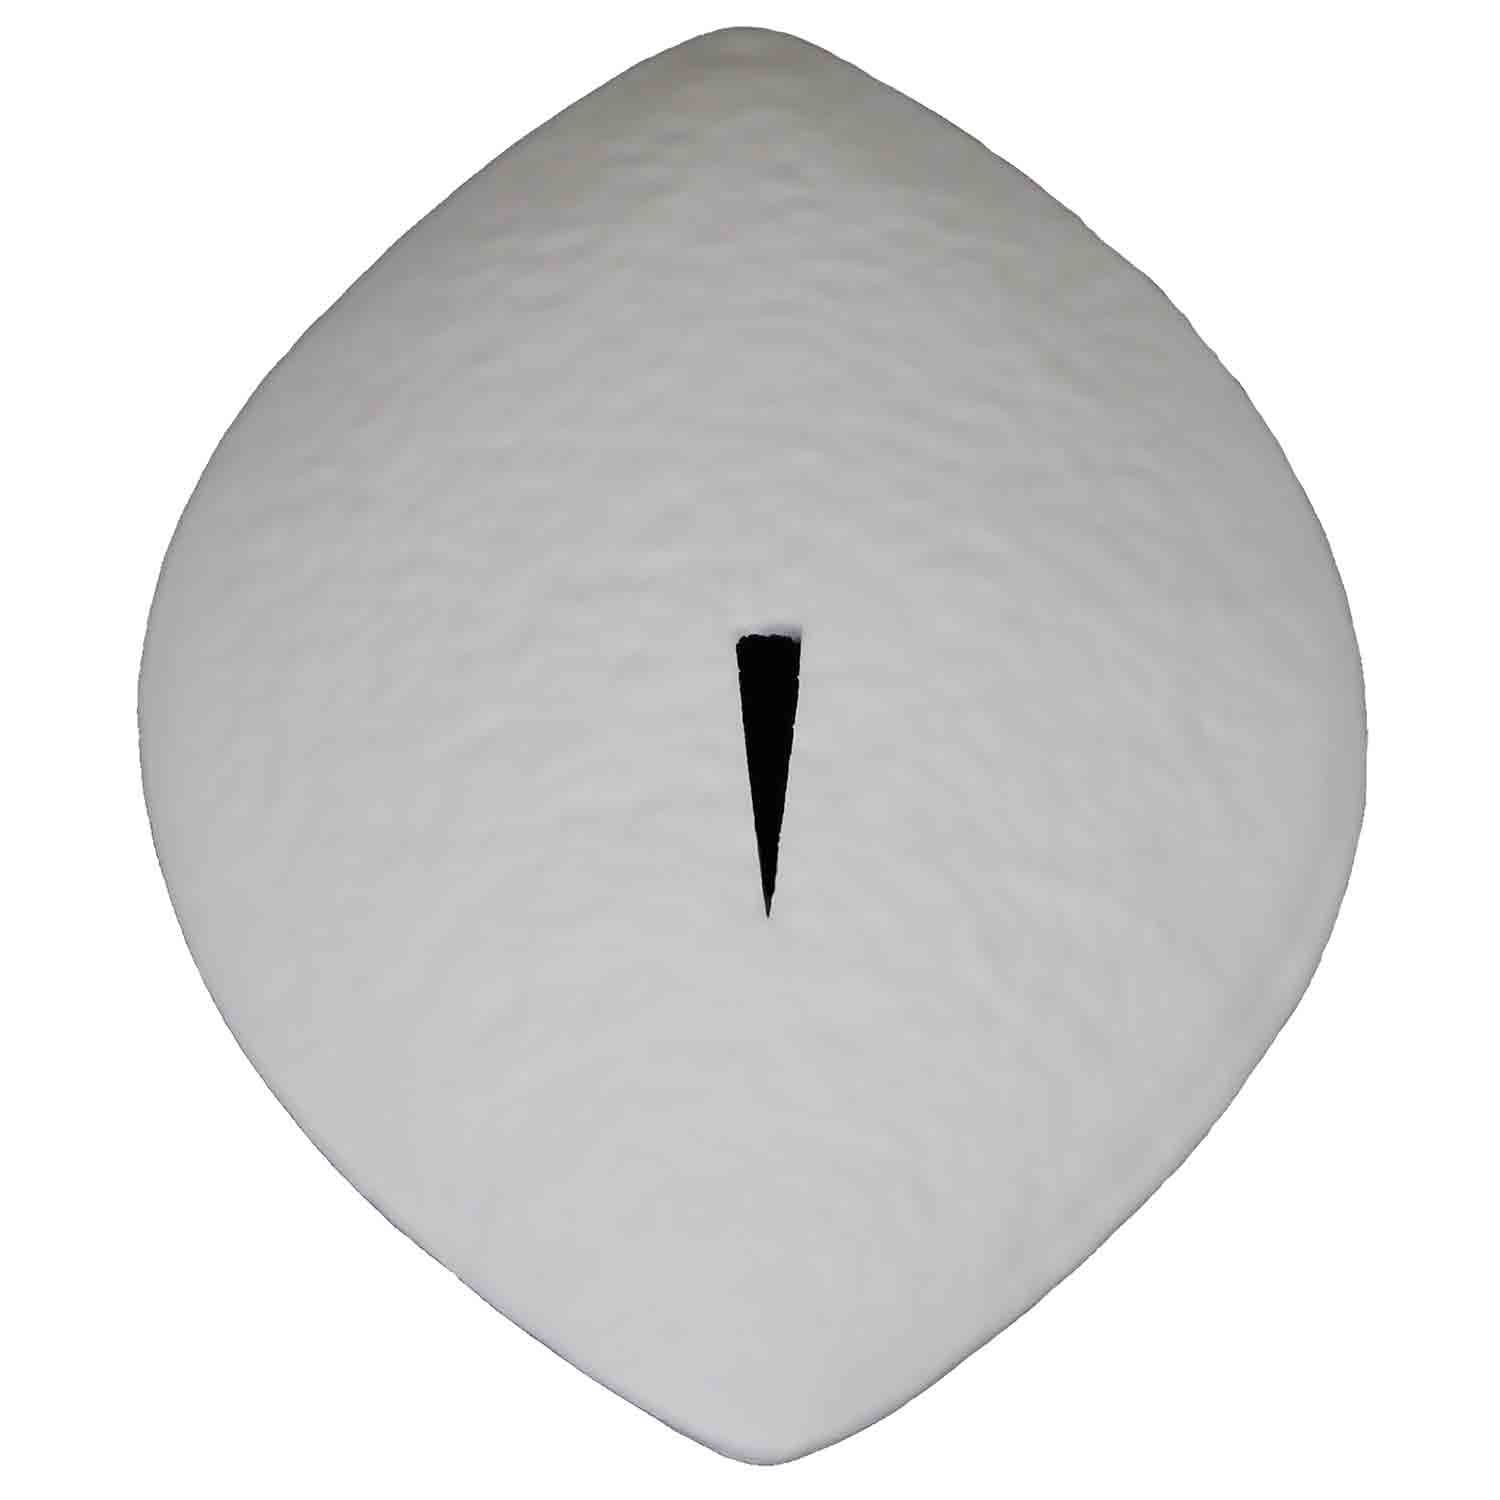 Memento Biodegradable Water Urn for Ashes in White Top View